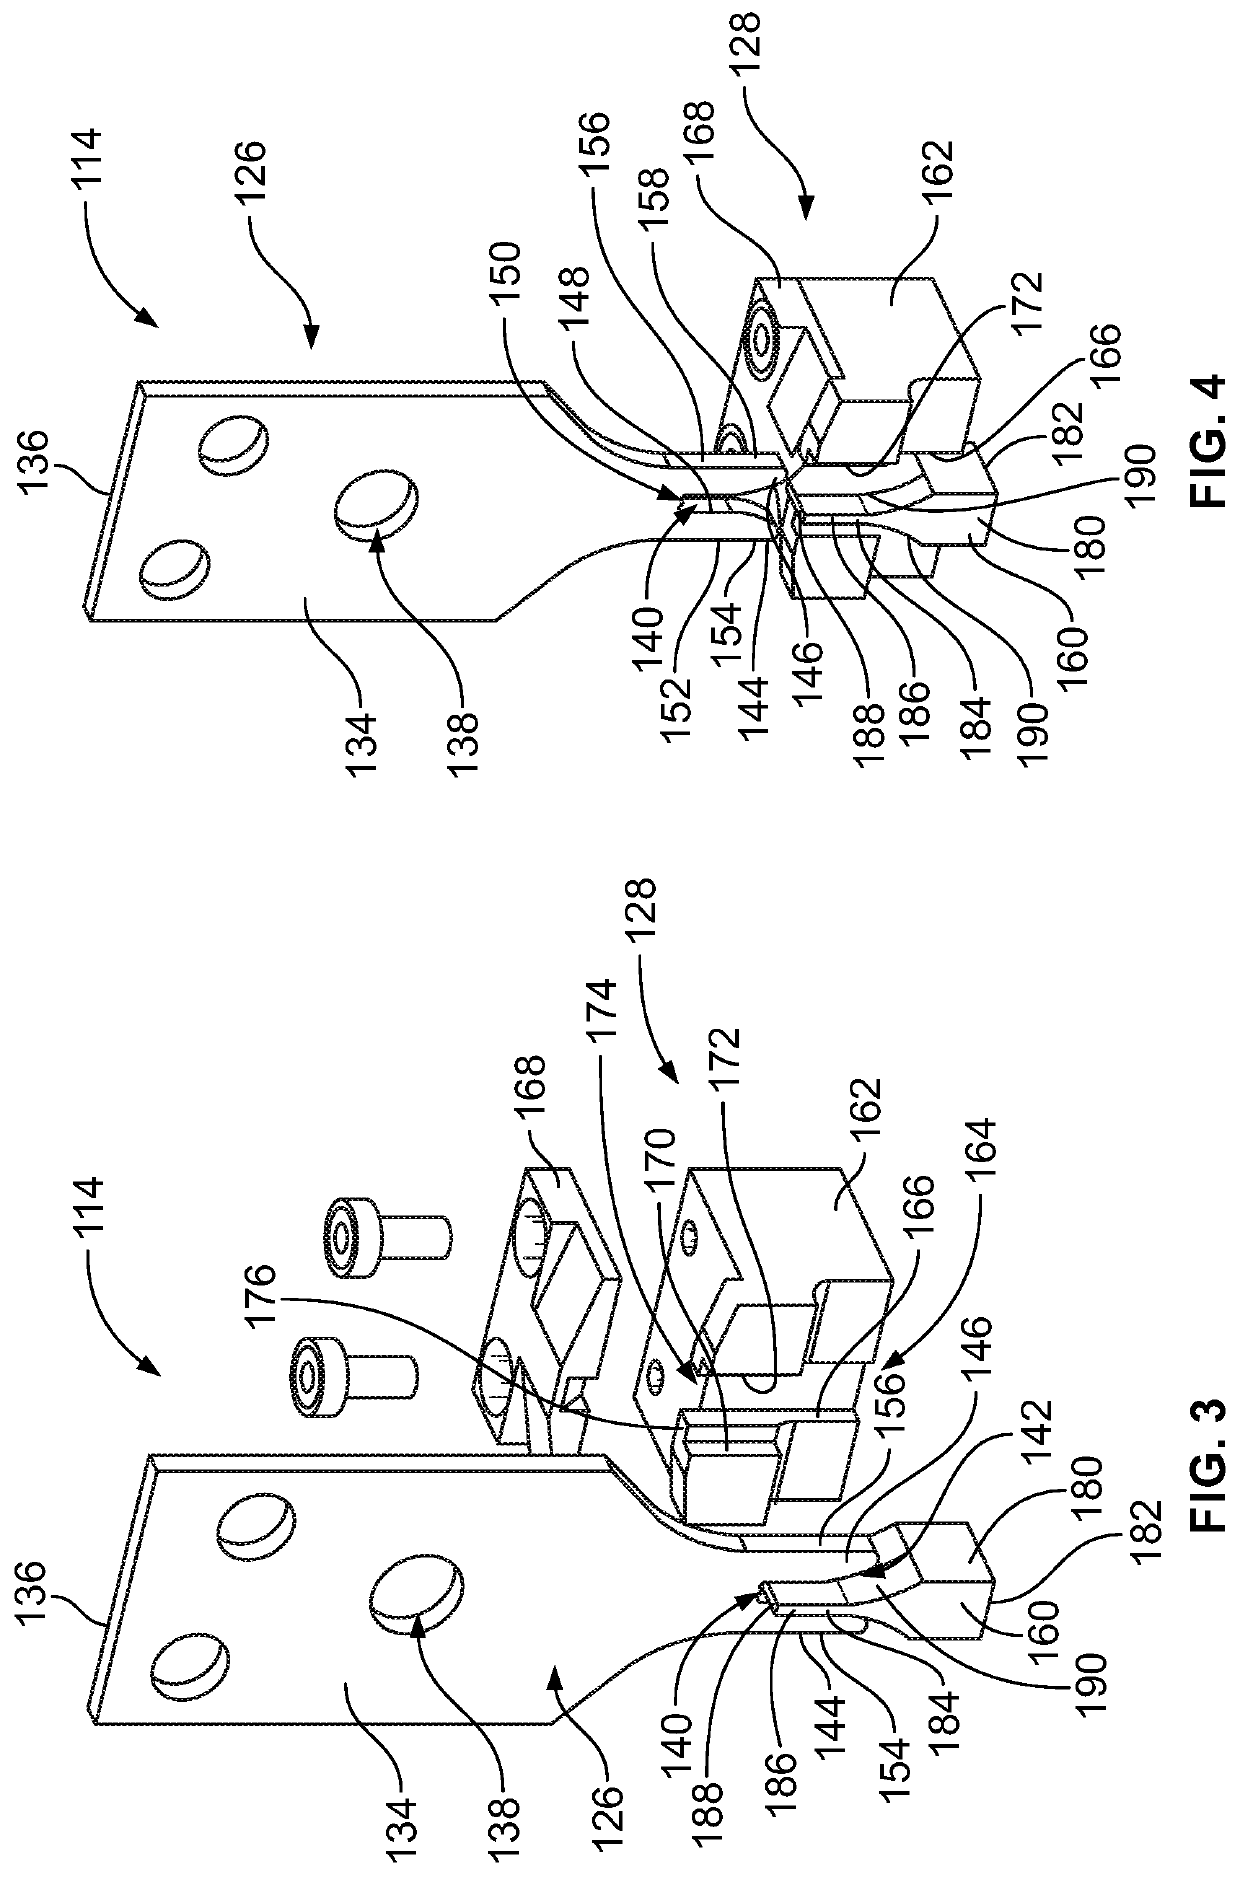 Crimp tooling having guide surfaces